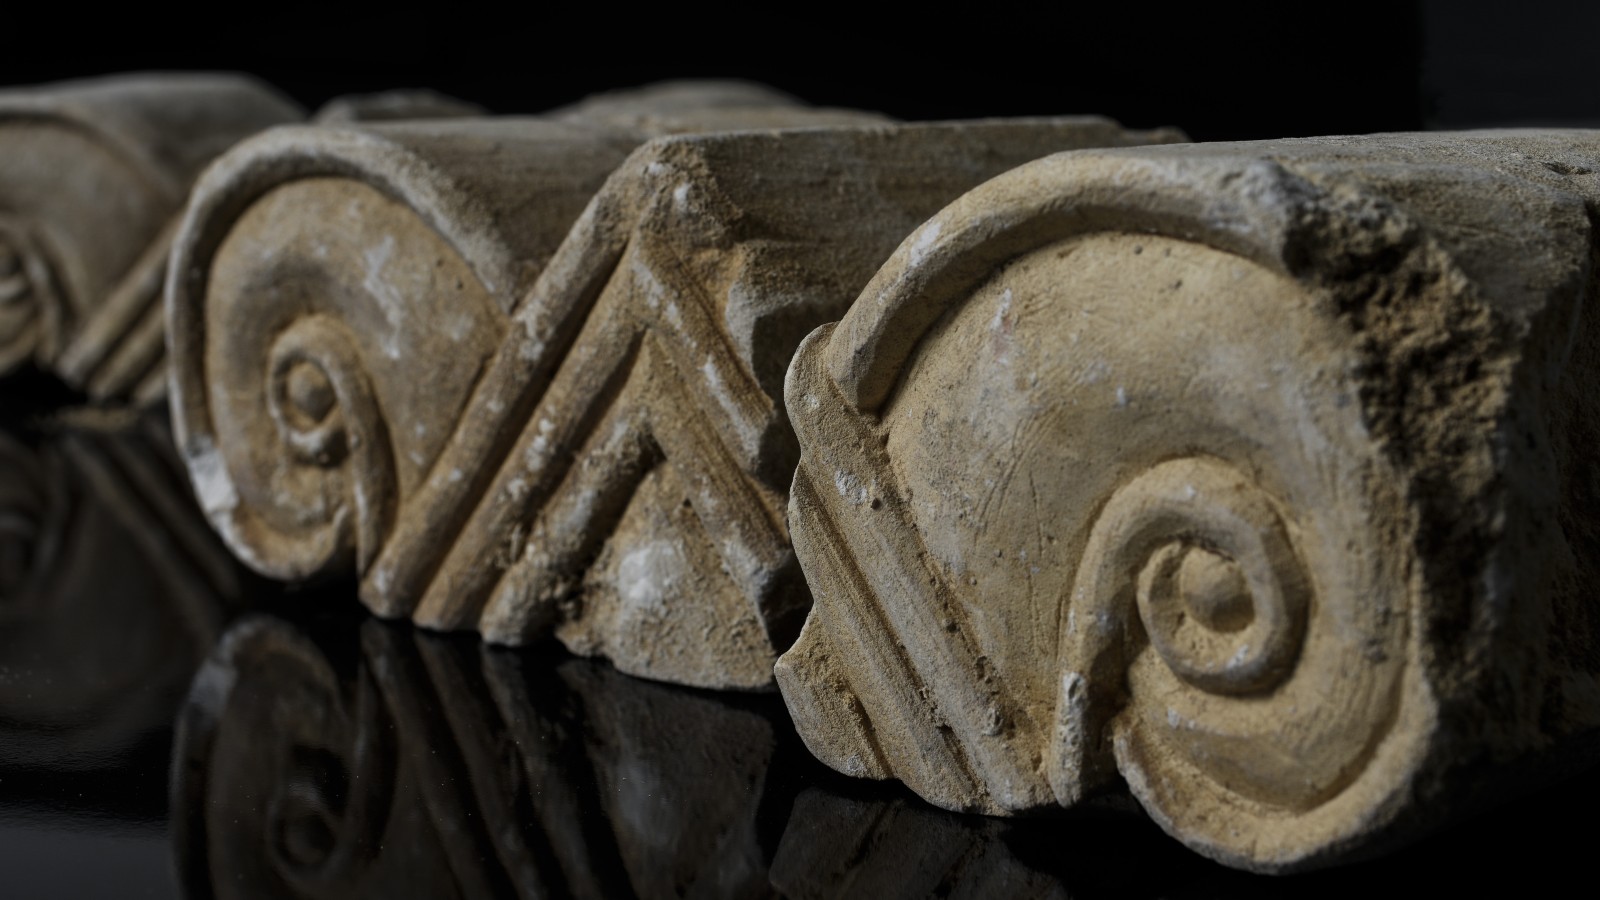 Mini capitals that stood at the top of the columns revealed in the Armon Hanatziv excavation. Photo by Shai Halevi/Israel Antiquities Authority